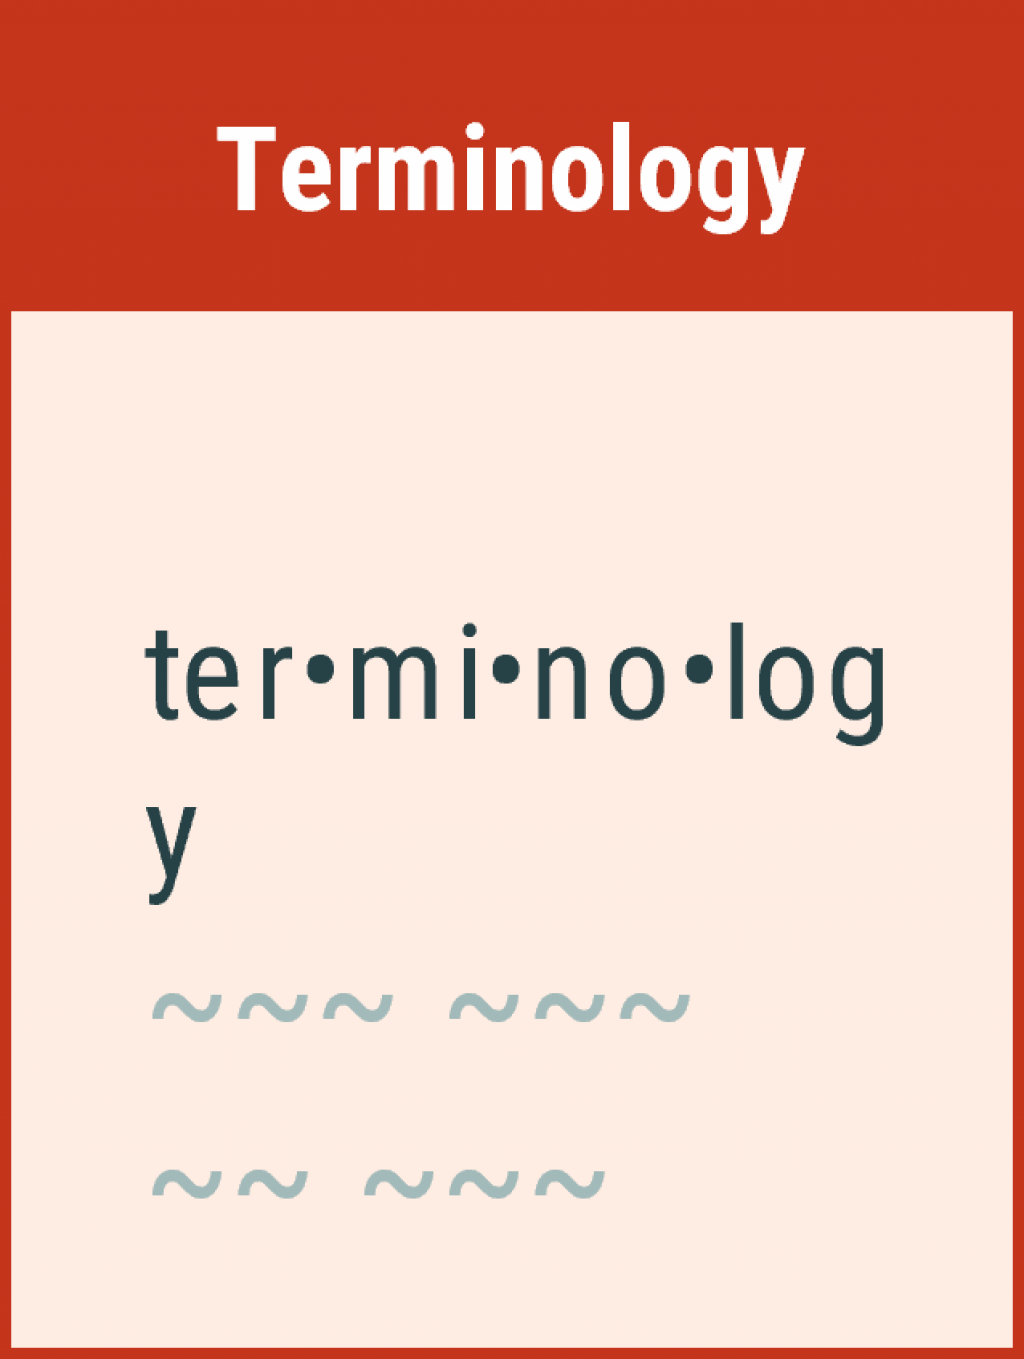 Models should be established in accordance with existing terms and definitions, as far as possible. Illustration showing the word terminology, divided into its syllables. Below the word terminology, there are waves organized to look like a paragraph. The illustration looks like the setup you would find in a dictionary. 